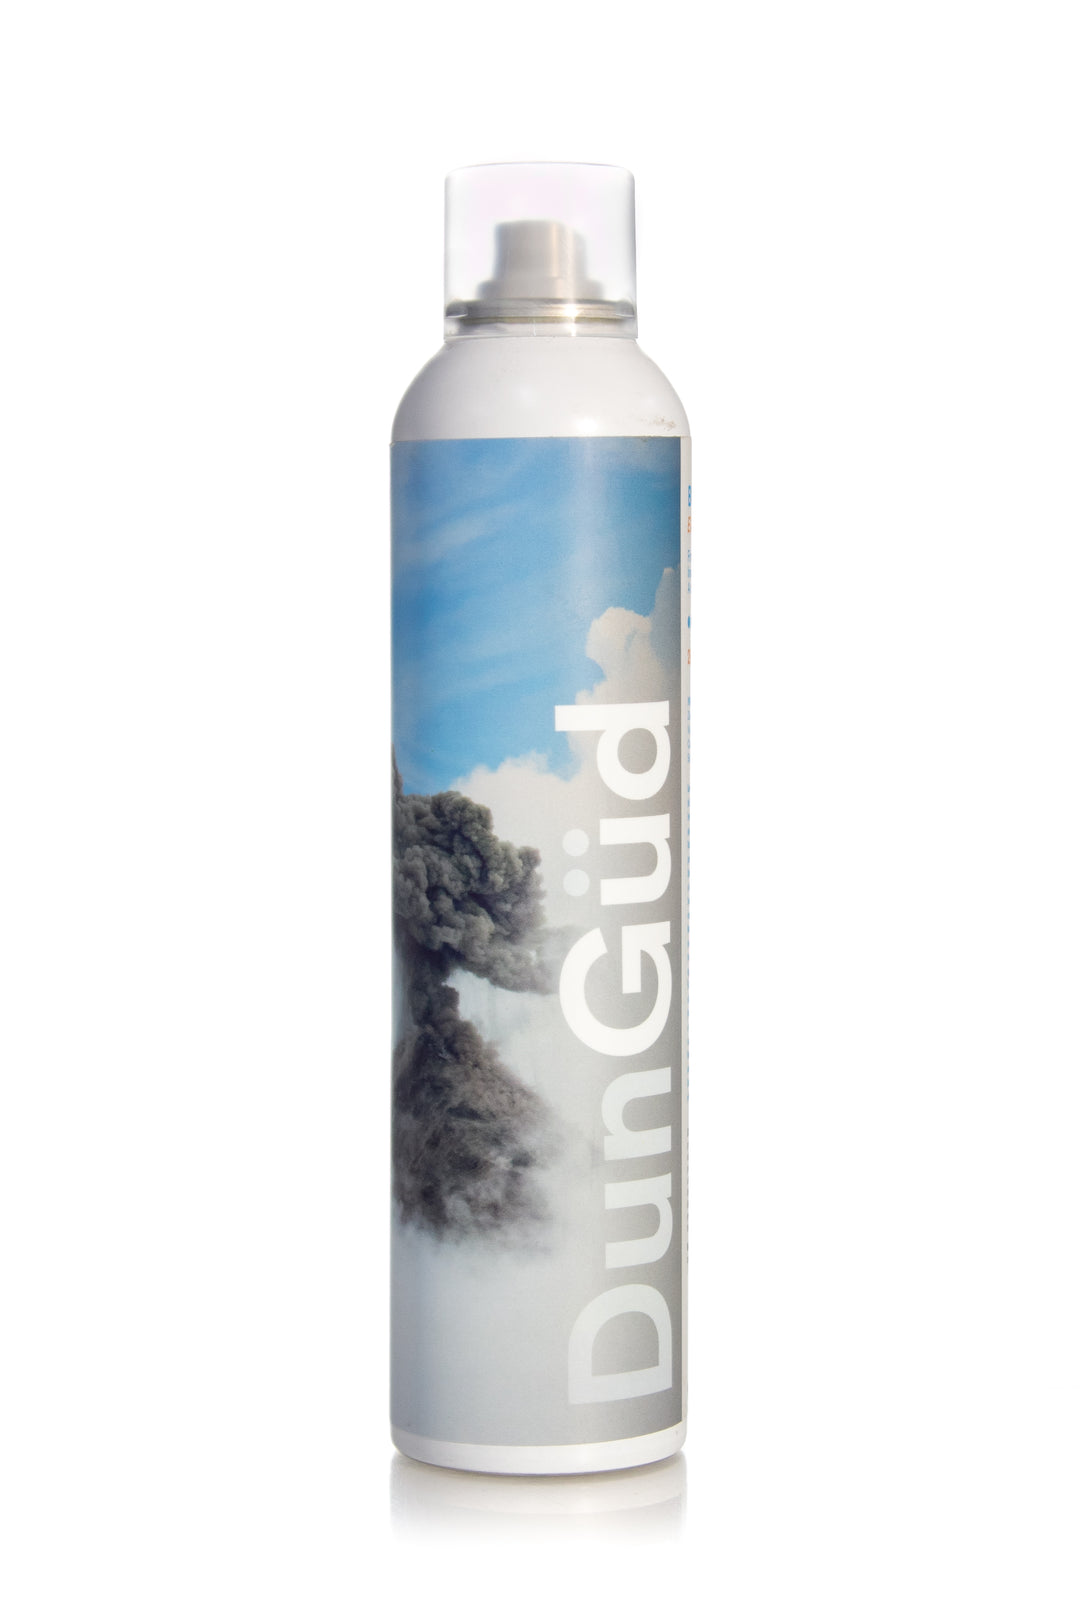 DUNGUD Blow Out Expansion Spray | 200g